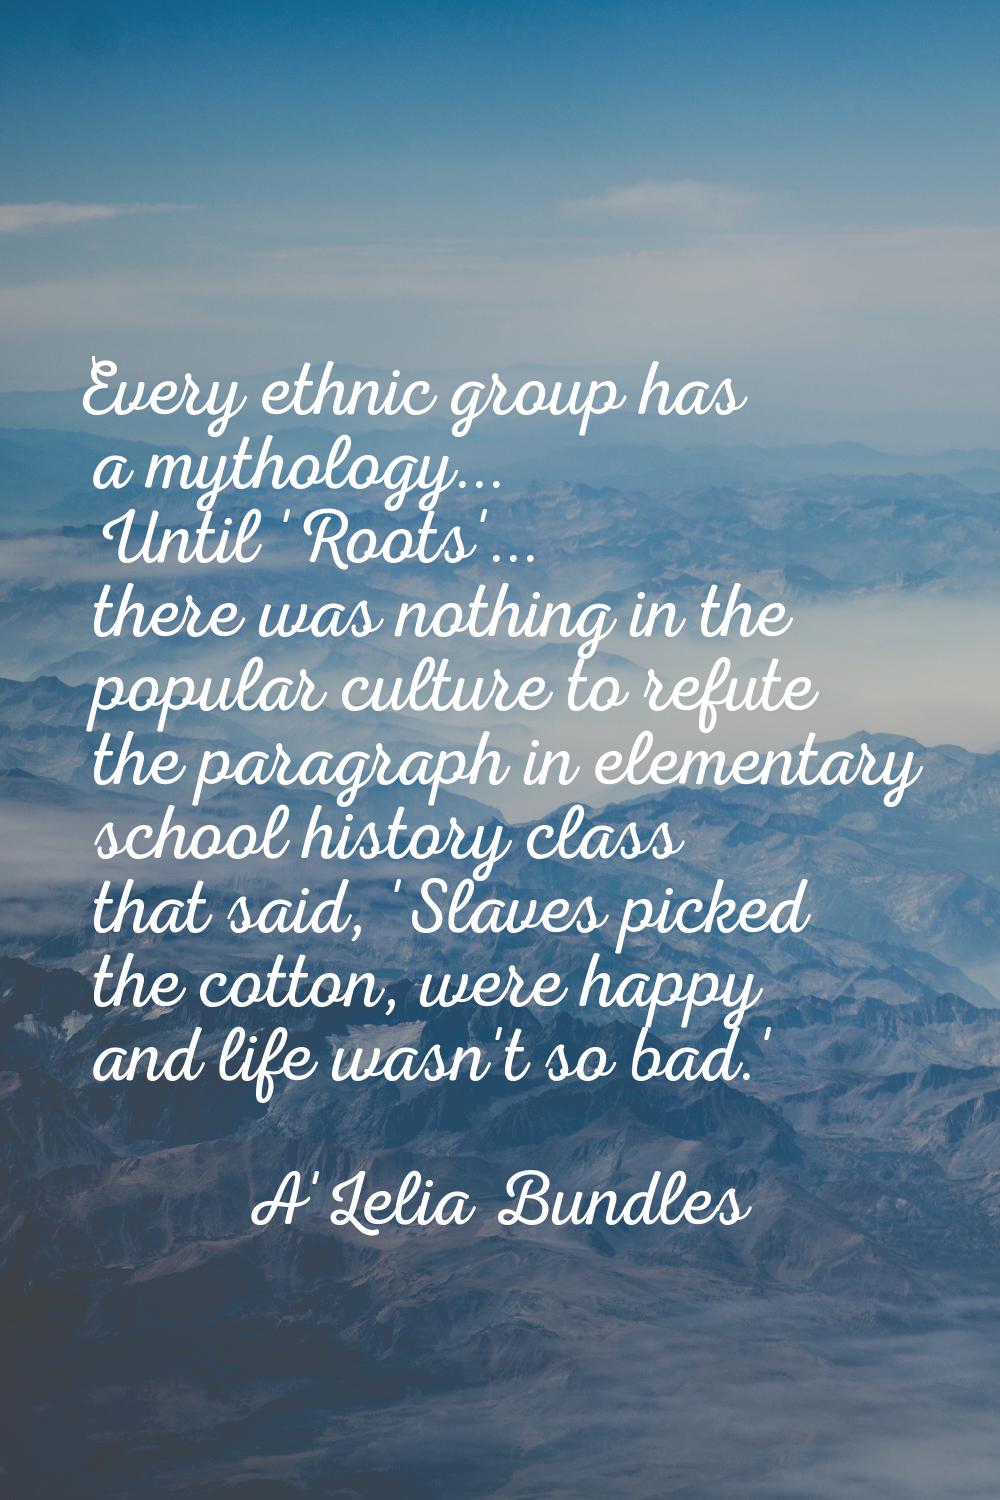 Every ethnic group has a mythology... Until 'Roots'... there was nothing in the popular culture to 